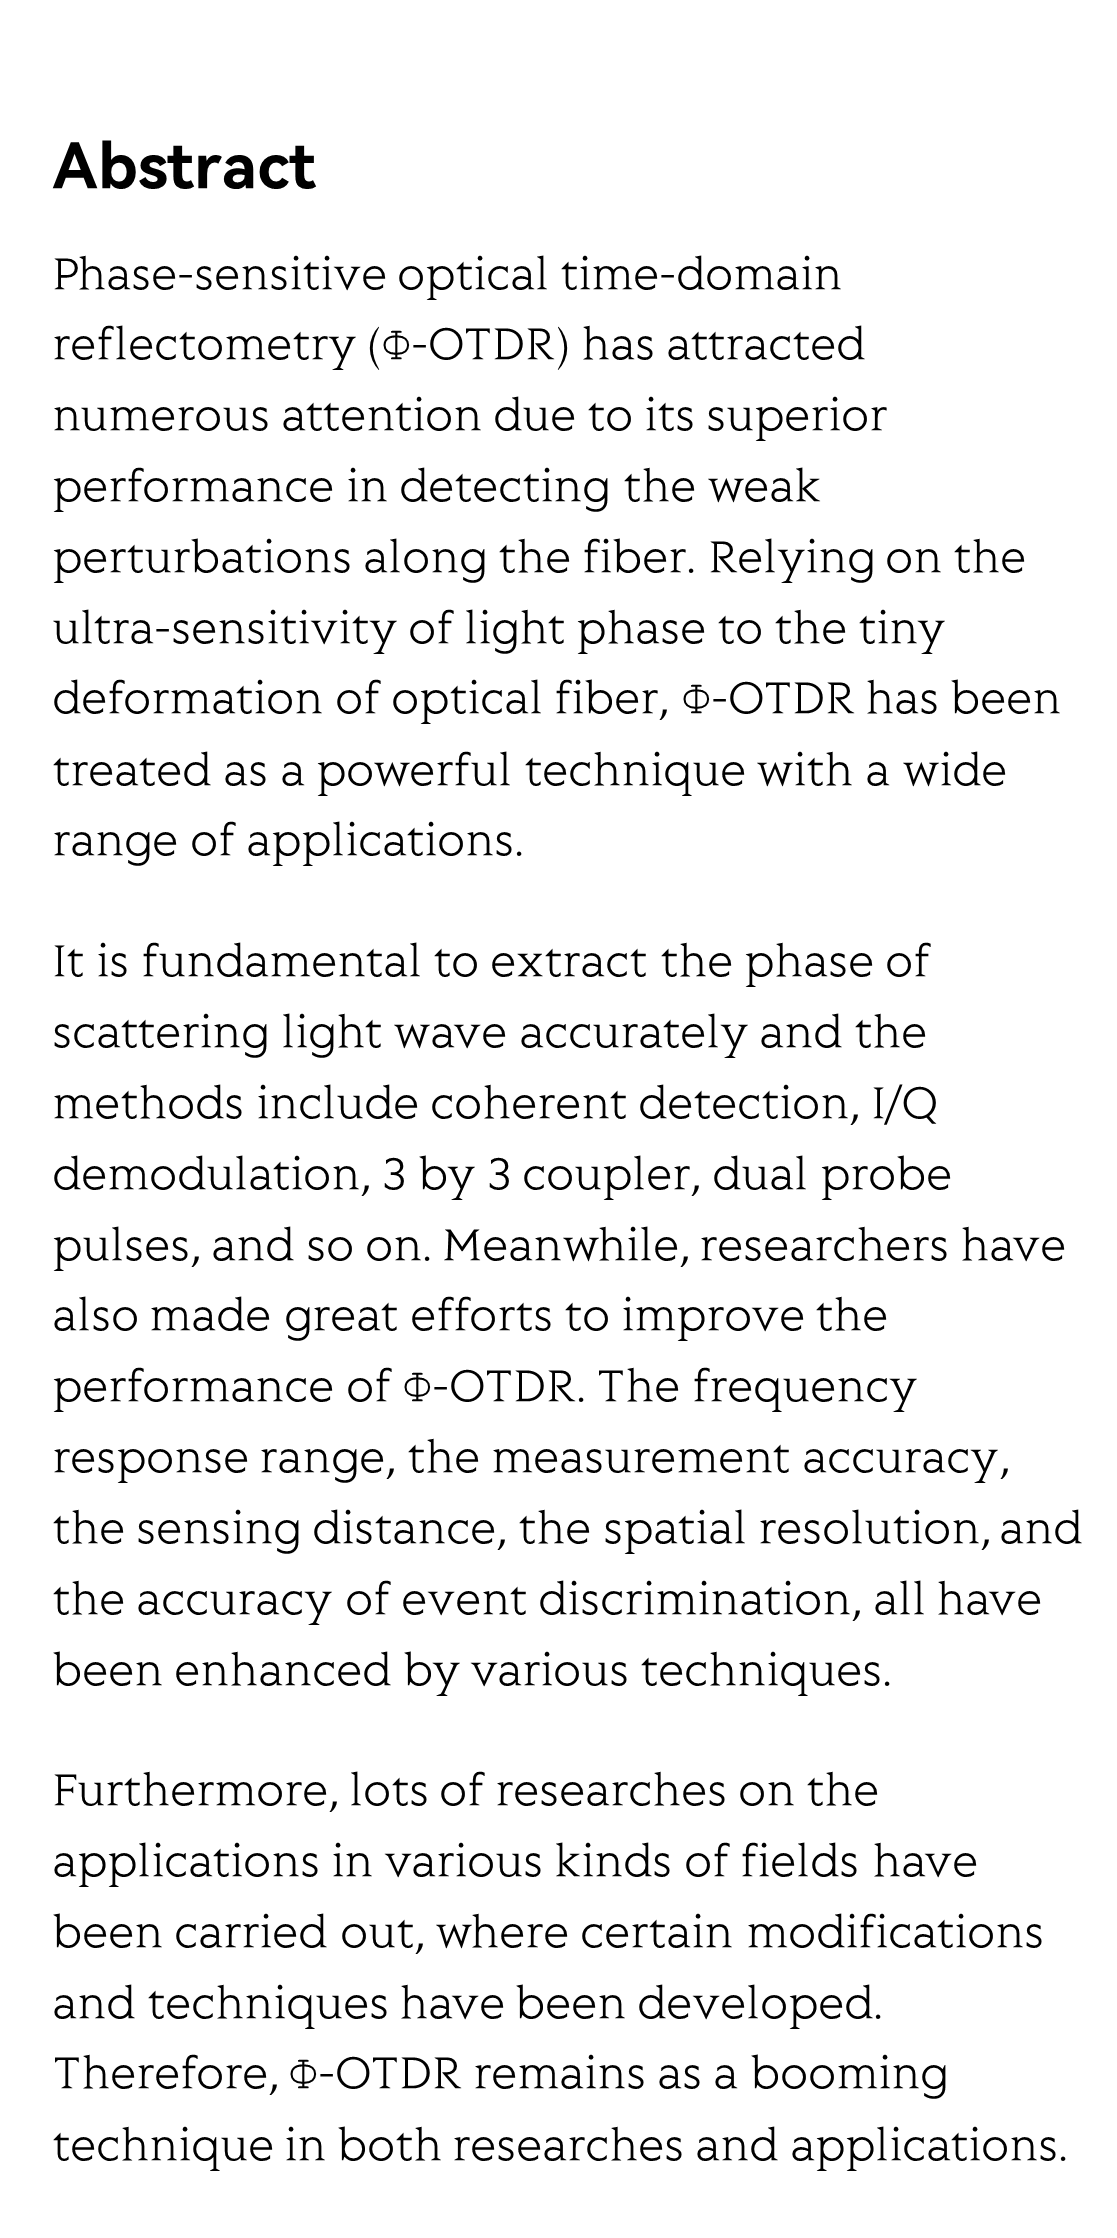 Advances in phase-sensitive optical time-domain reflectometry_2